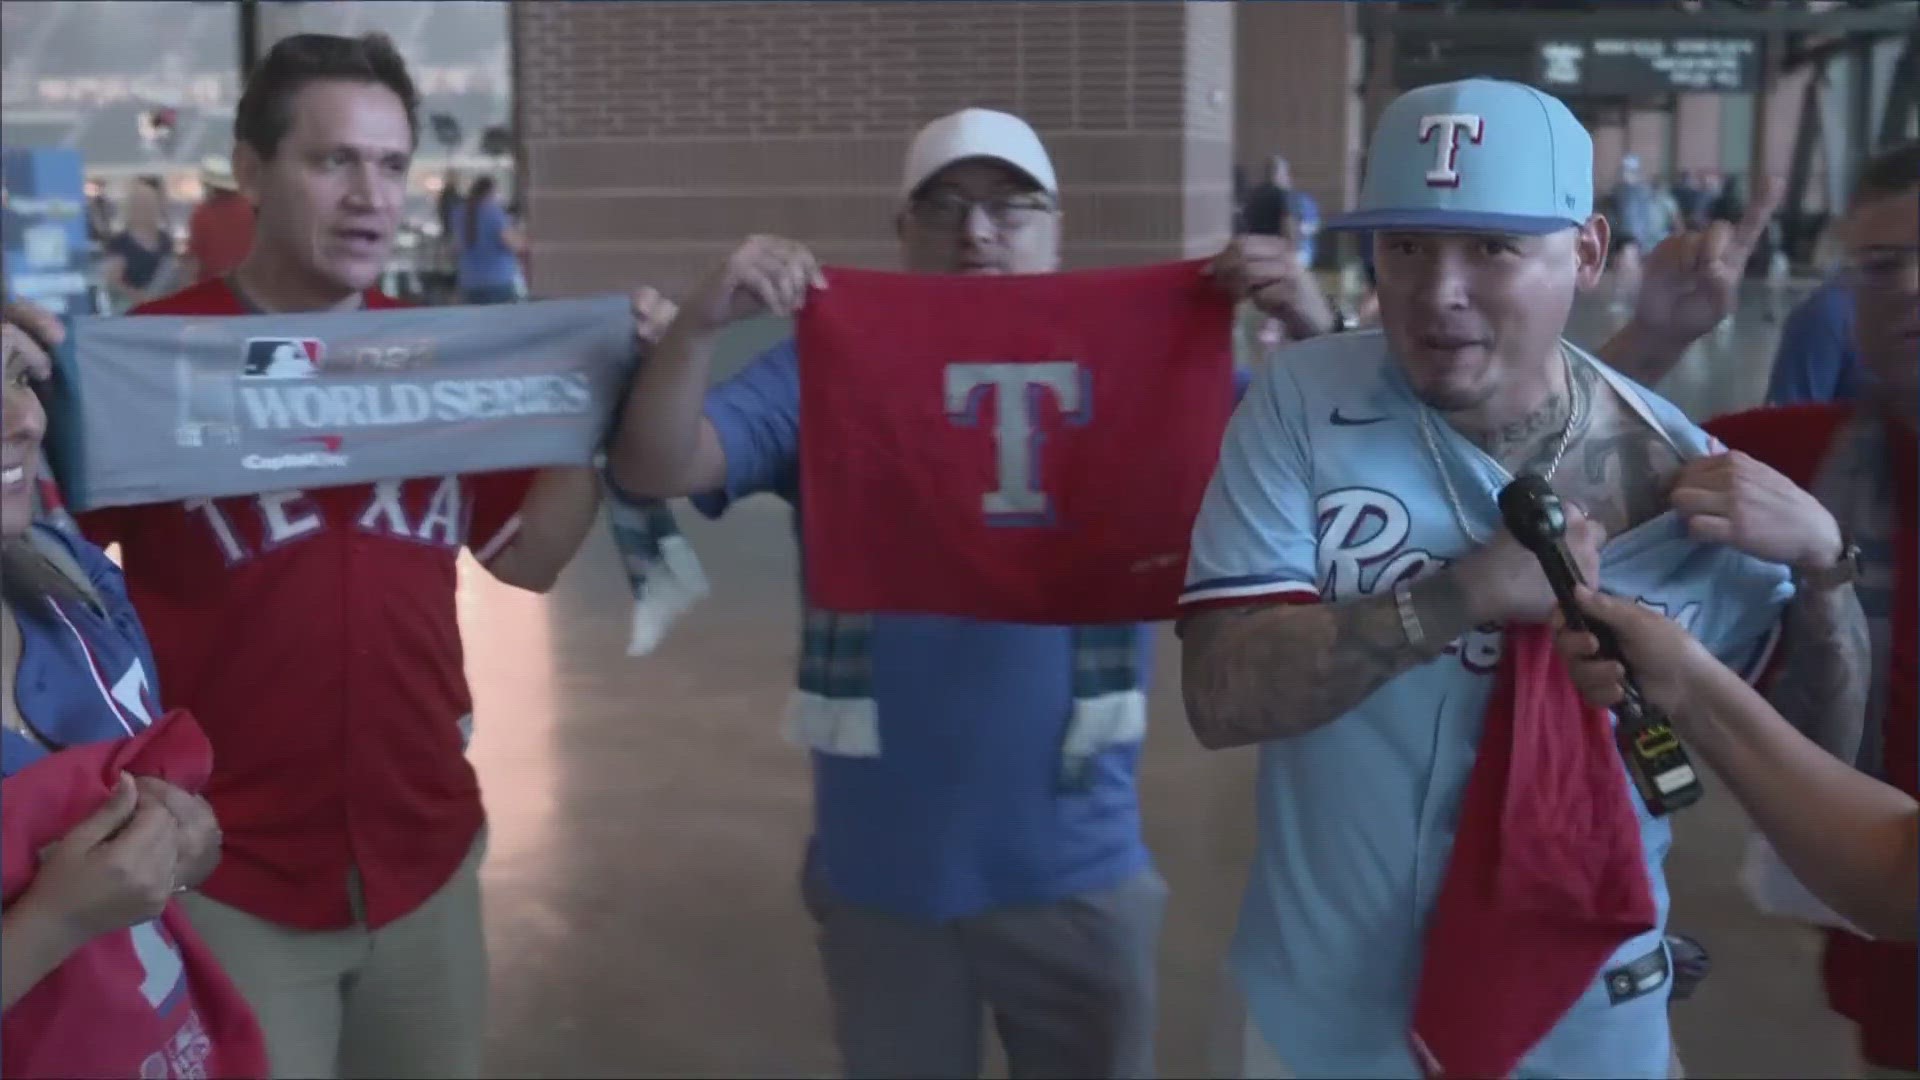 Texas Rangers fans share excitement at Globe Life Field.